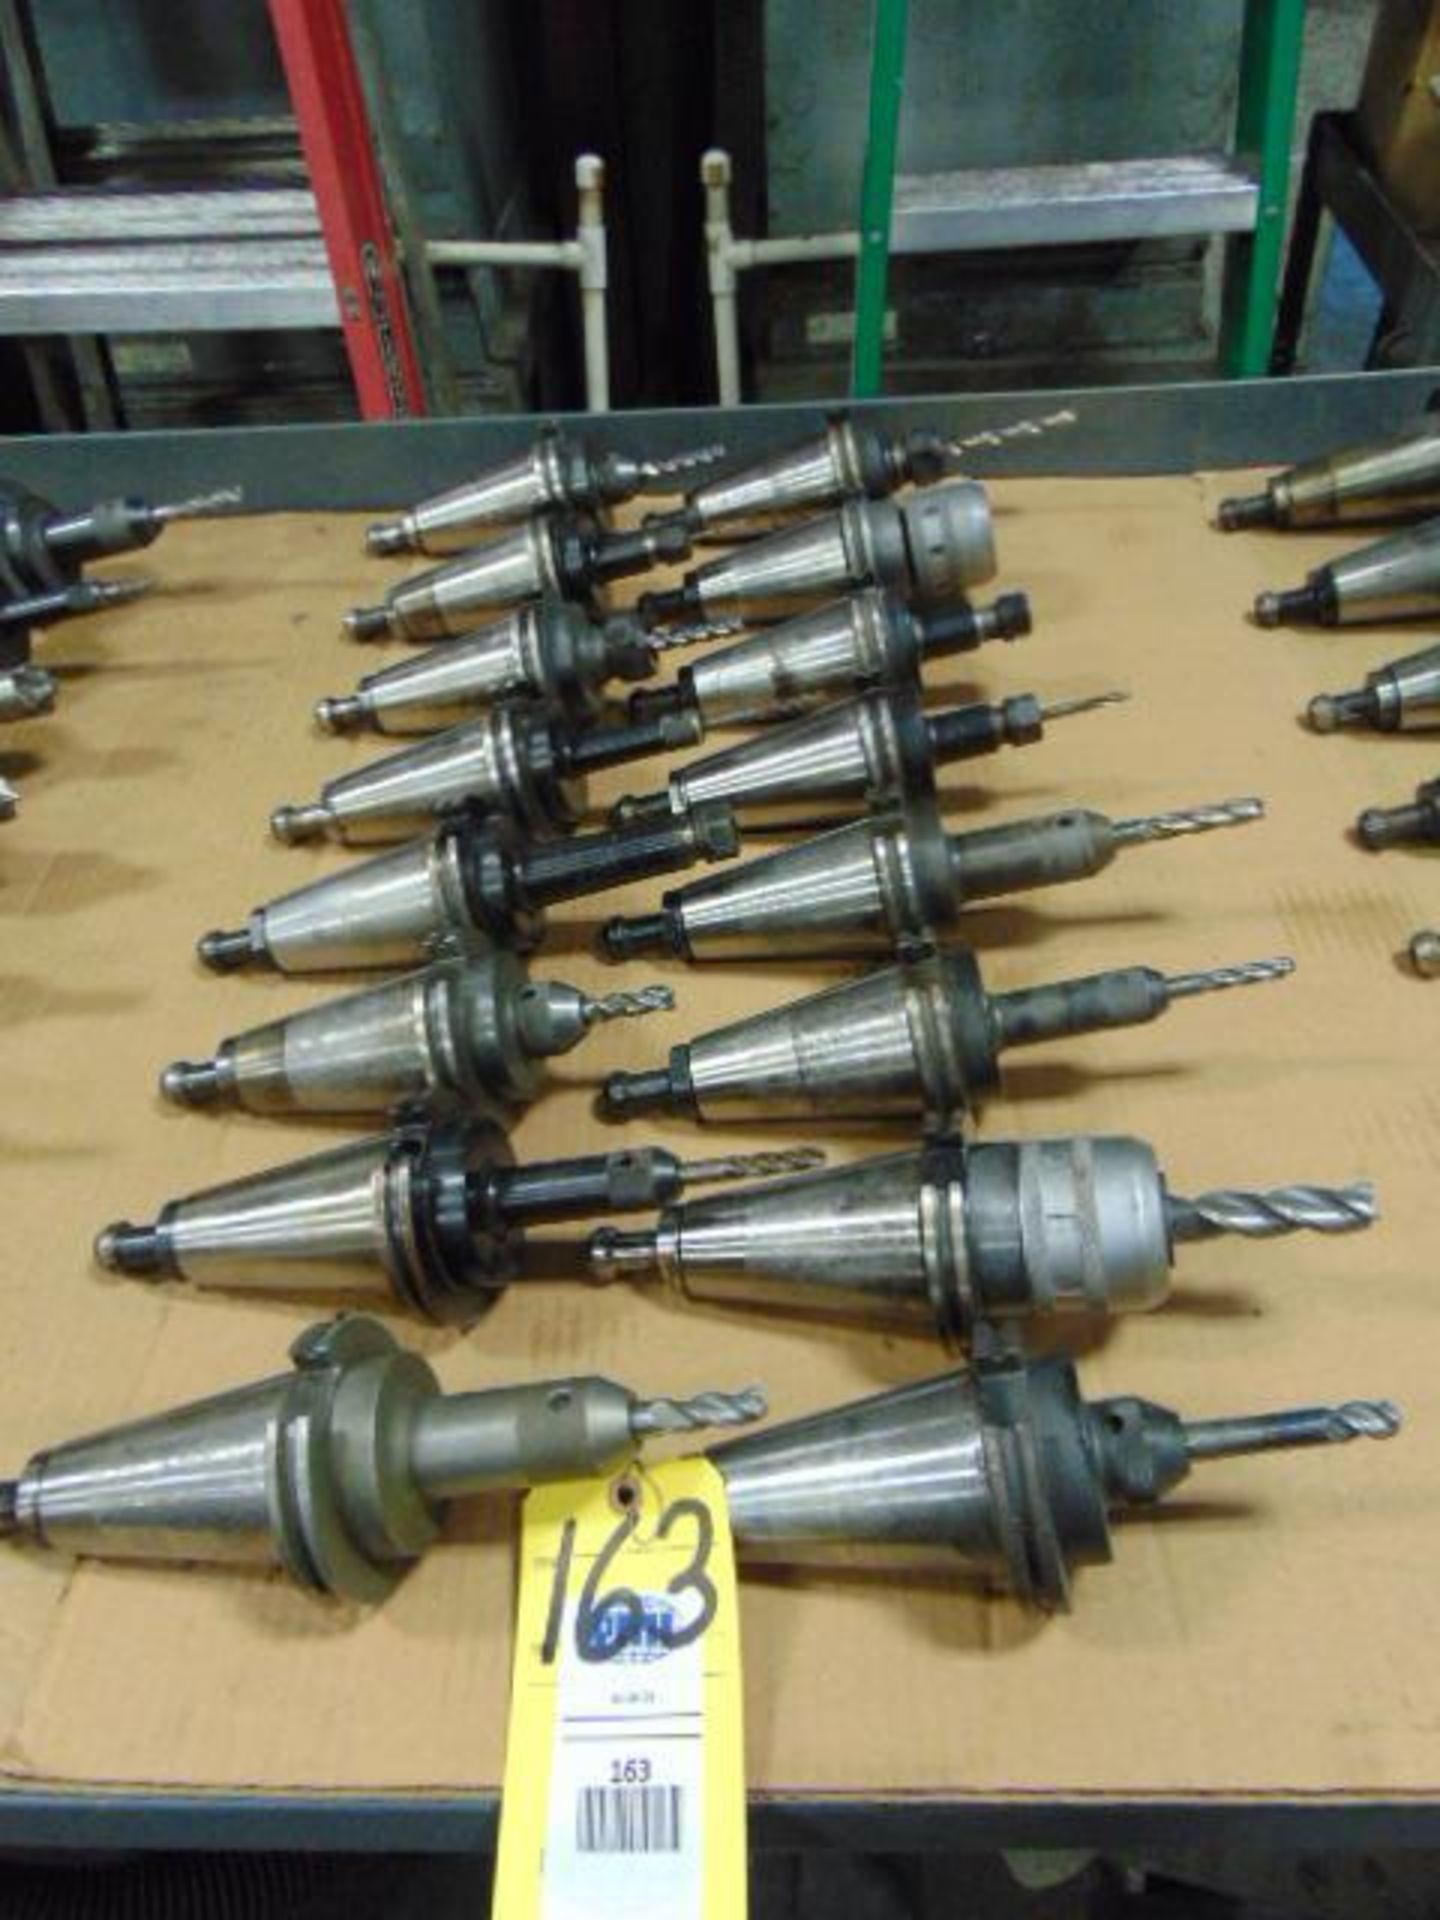 LOT OF 50-TAPER TOOL HOLDERS (16), assorted